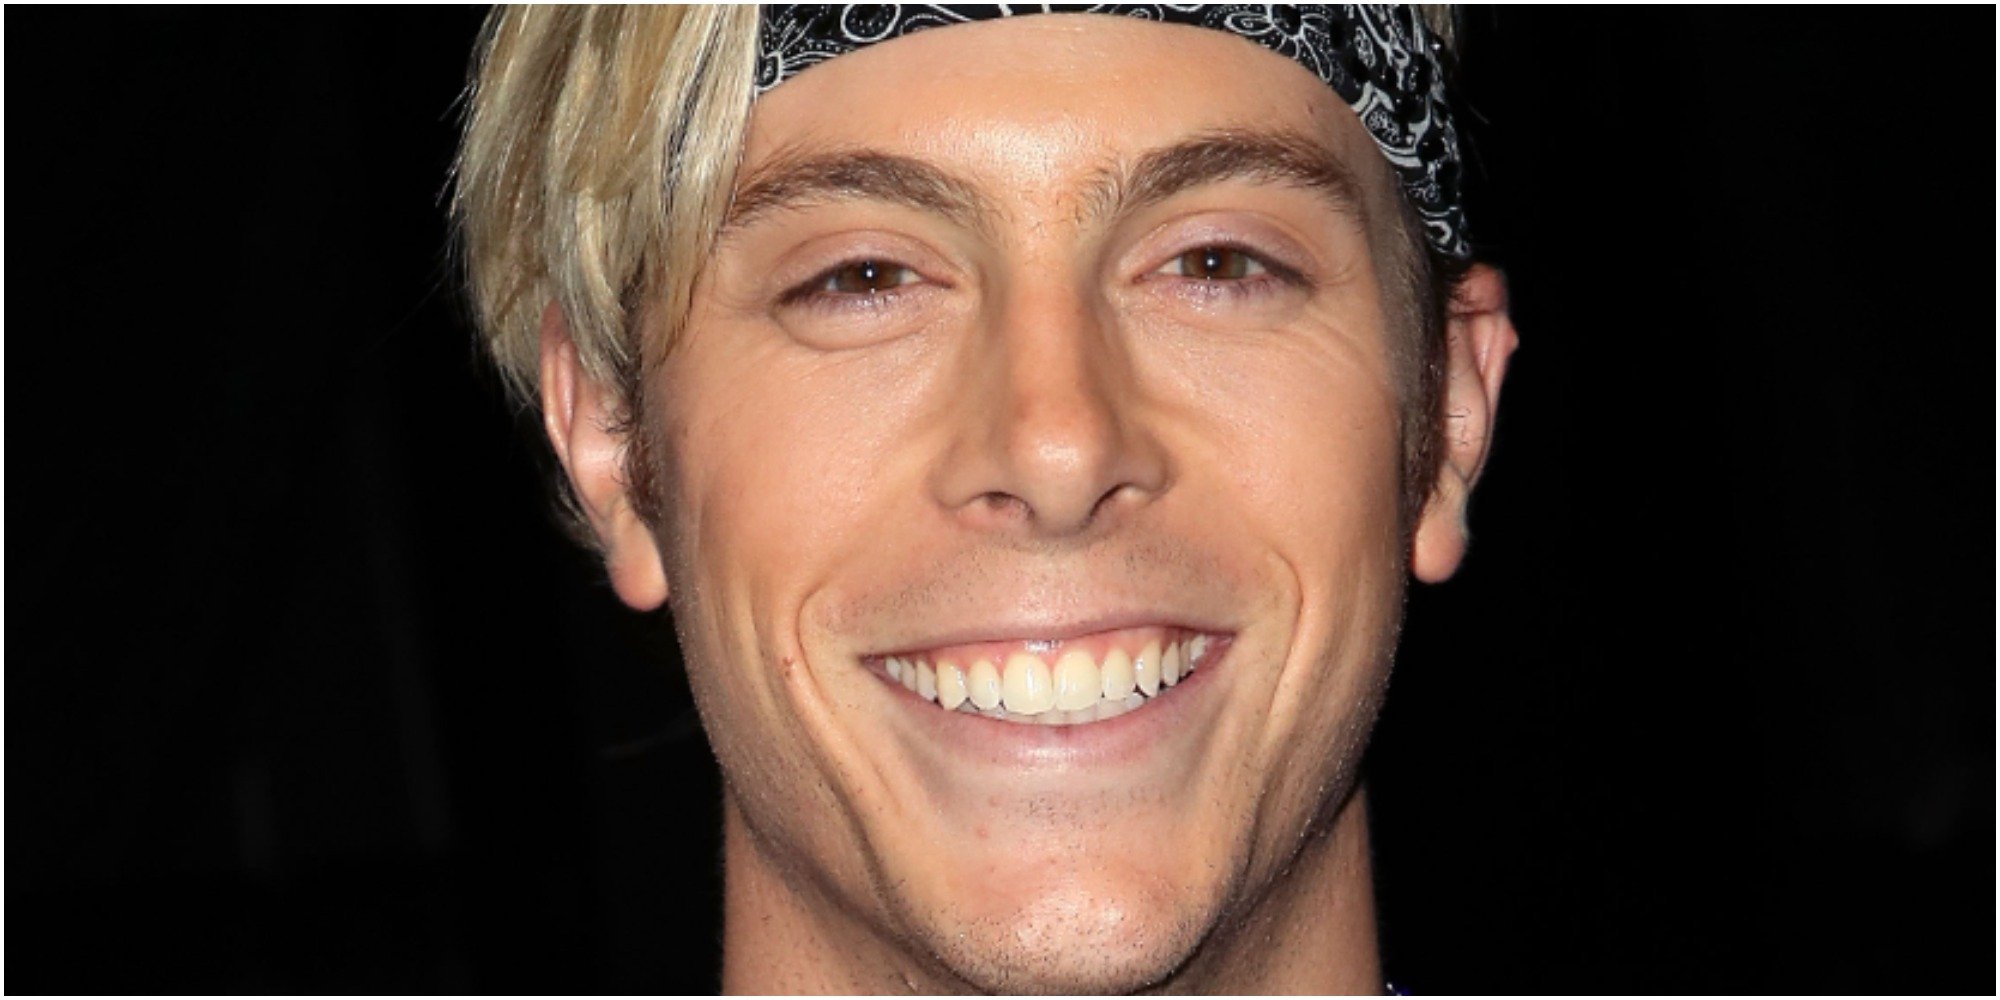 Riker Lynch was a part of the cast of DWTS.